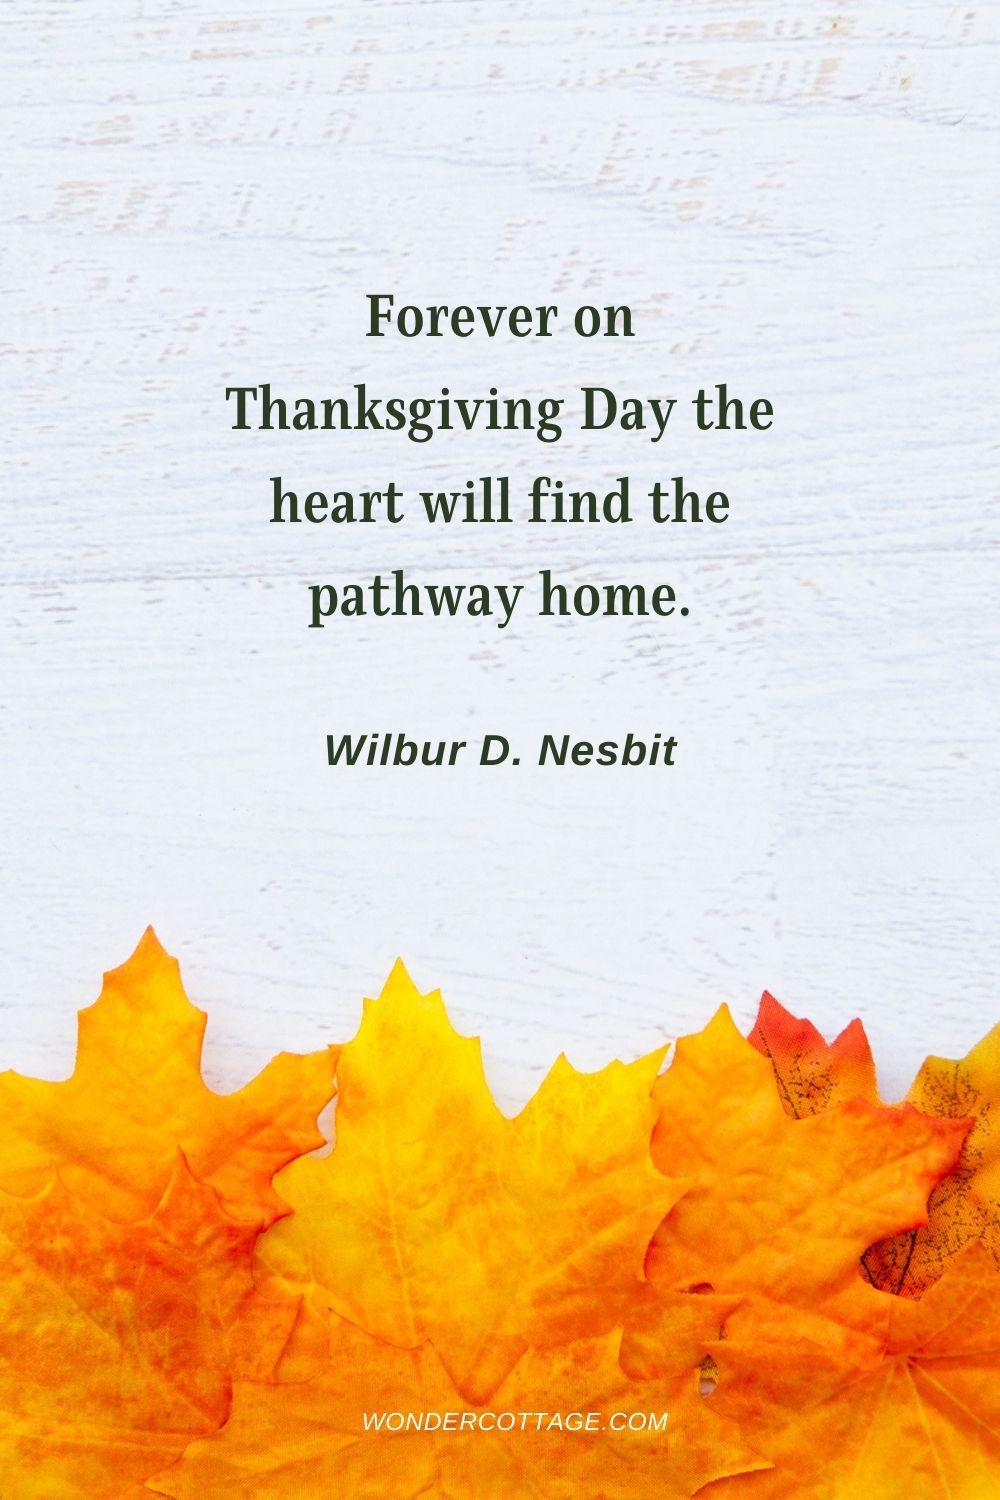 Forever on Thanksgiving Day the heart will find the pathway home. Wilbur D. Nesbit